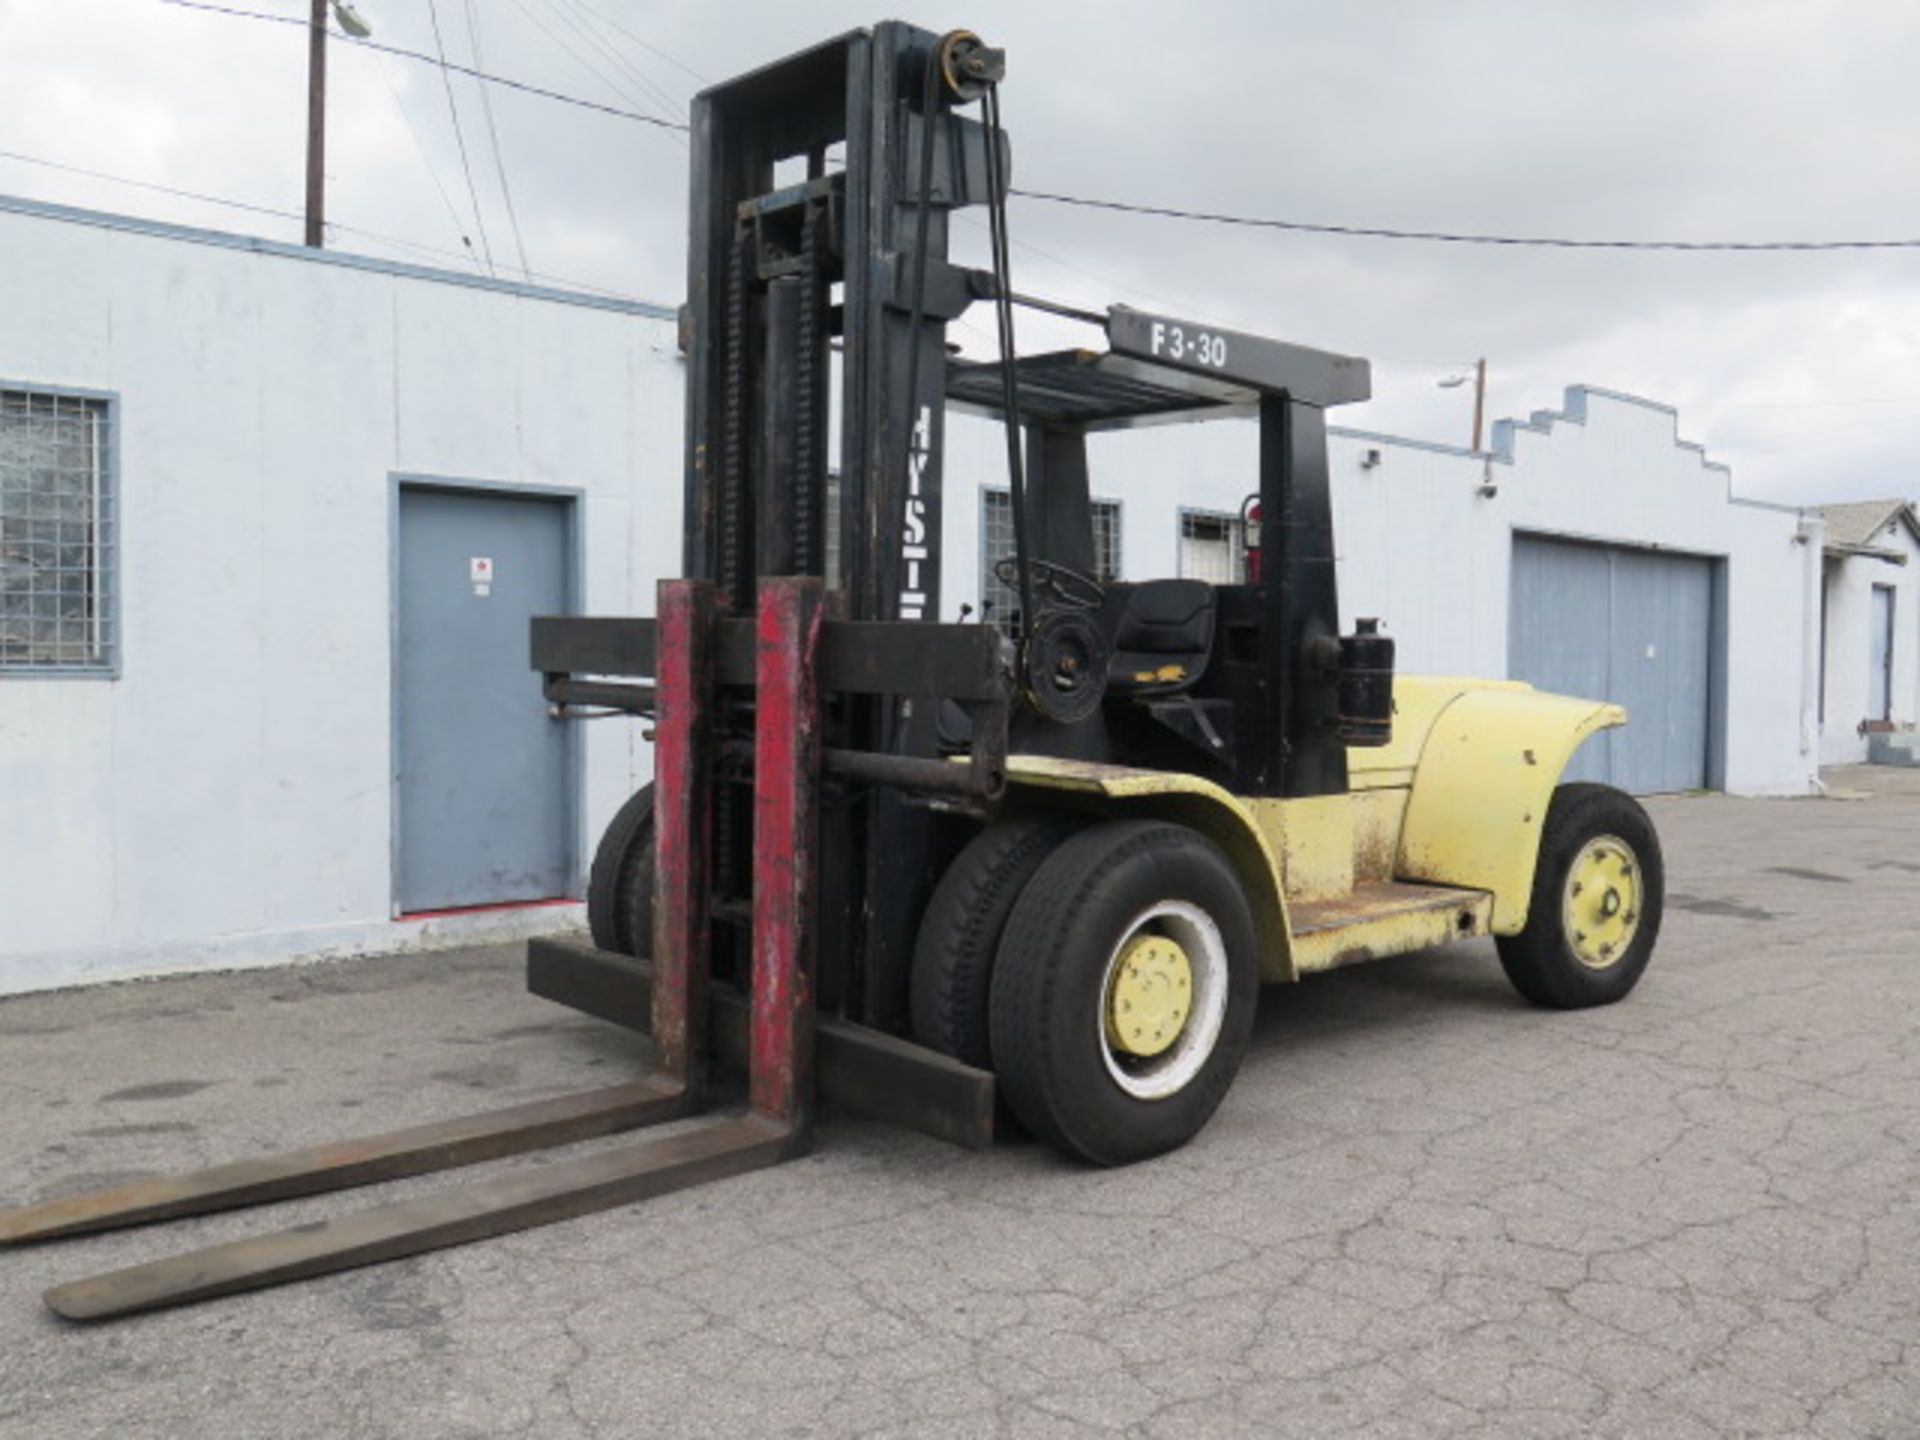 Hyster 300 30,000 Lb Cap LPG Forklift Adjustable Blades, Pneumatic Tires (SOLD AS-IS - NO WARRANTY) - Image 2 of 18